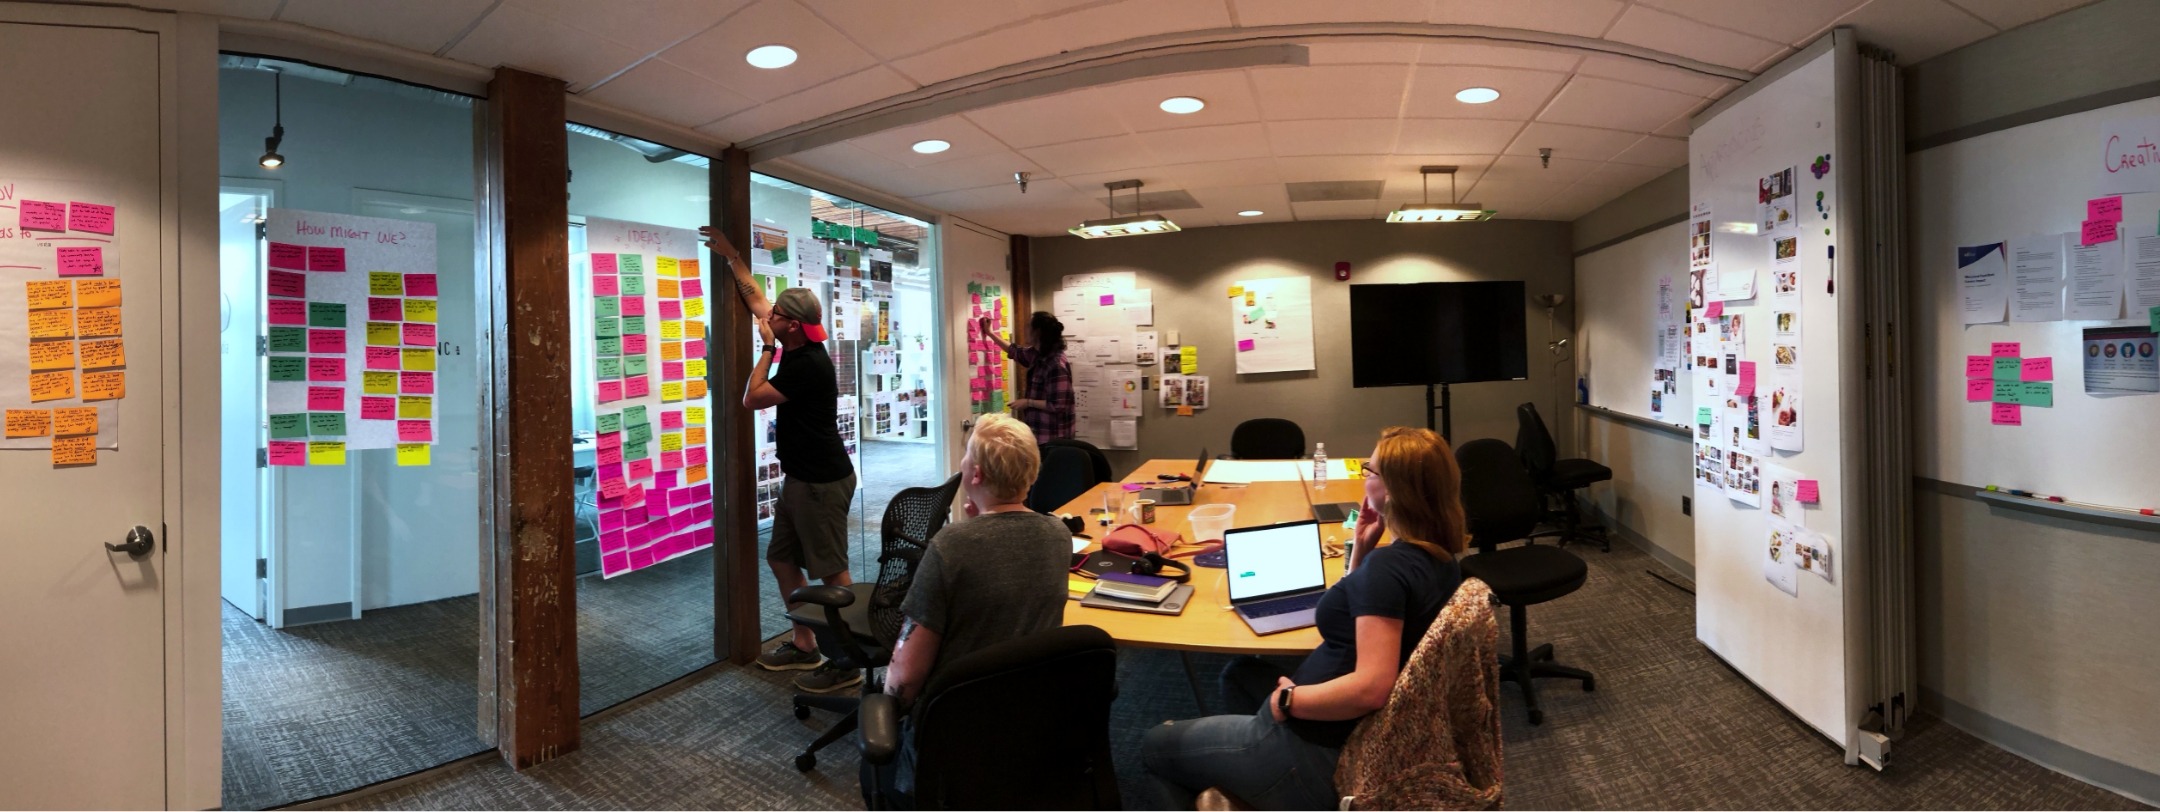 A view of inside the creative room and huddle.